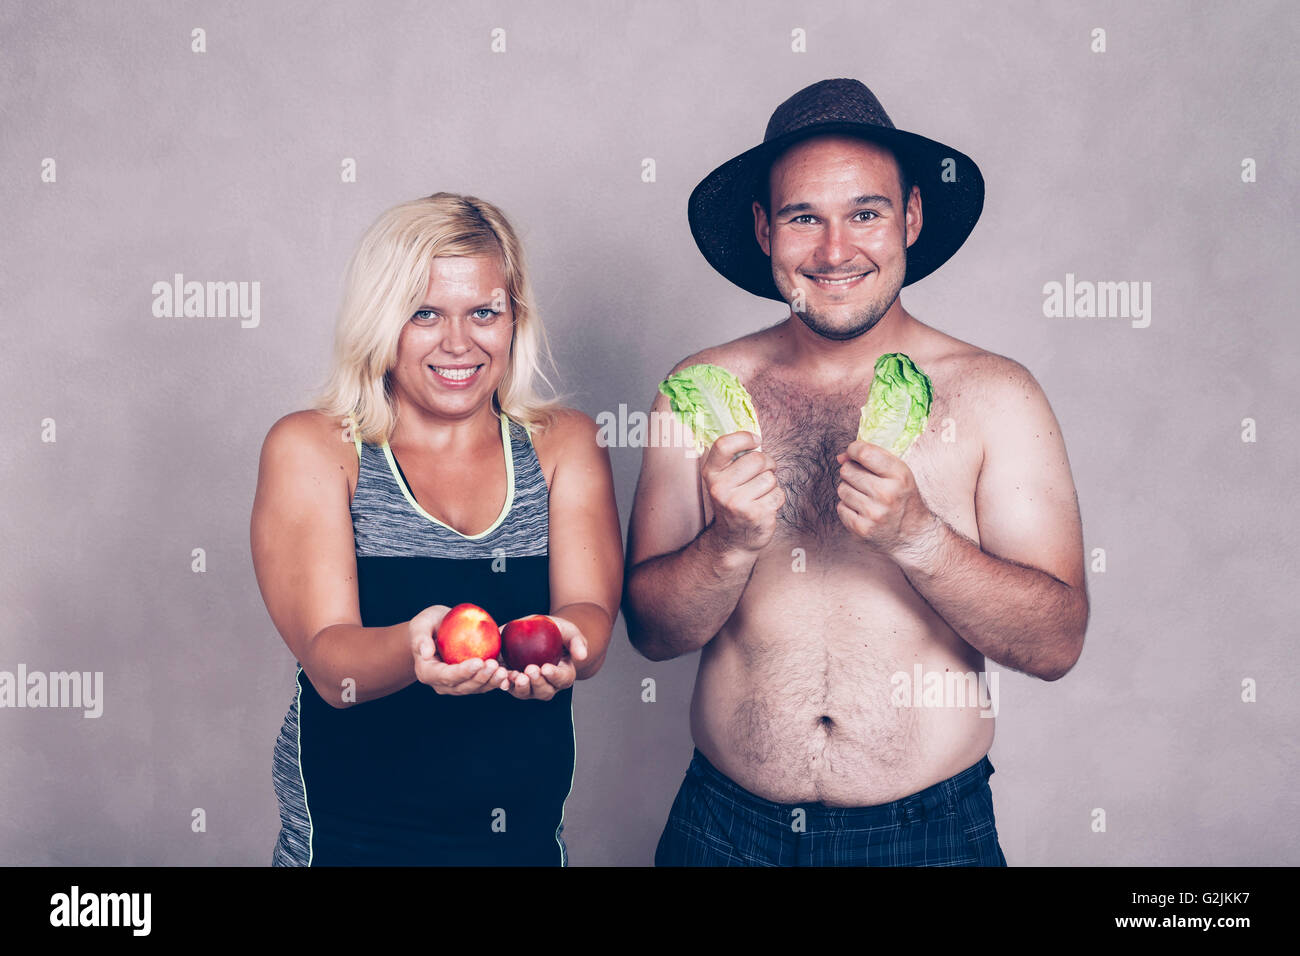 Funny young corpulent couple holding lettuce and nectarine. Stock Photo